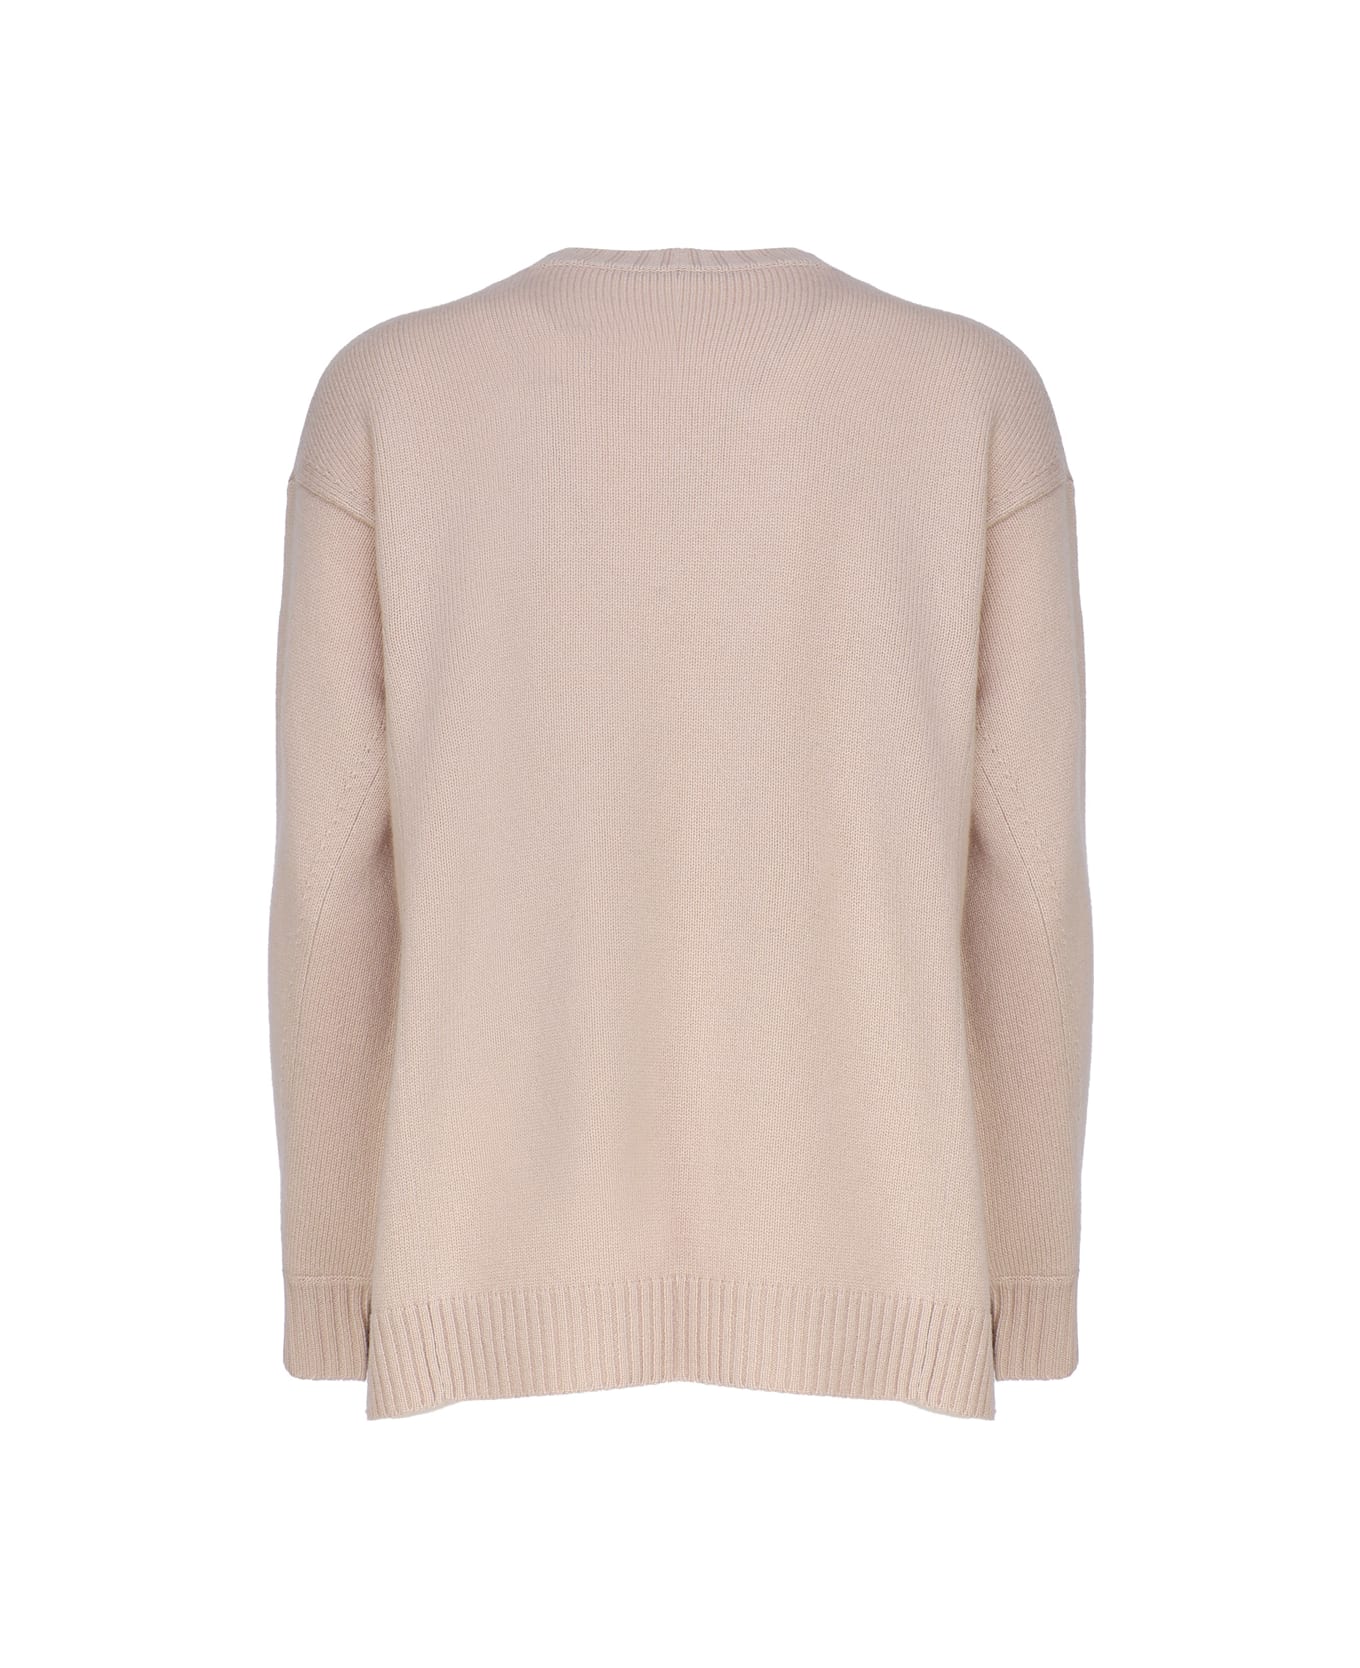 Max Mara Sweater In Wool And Cashmere | italist